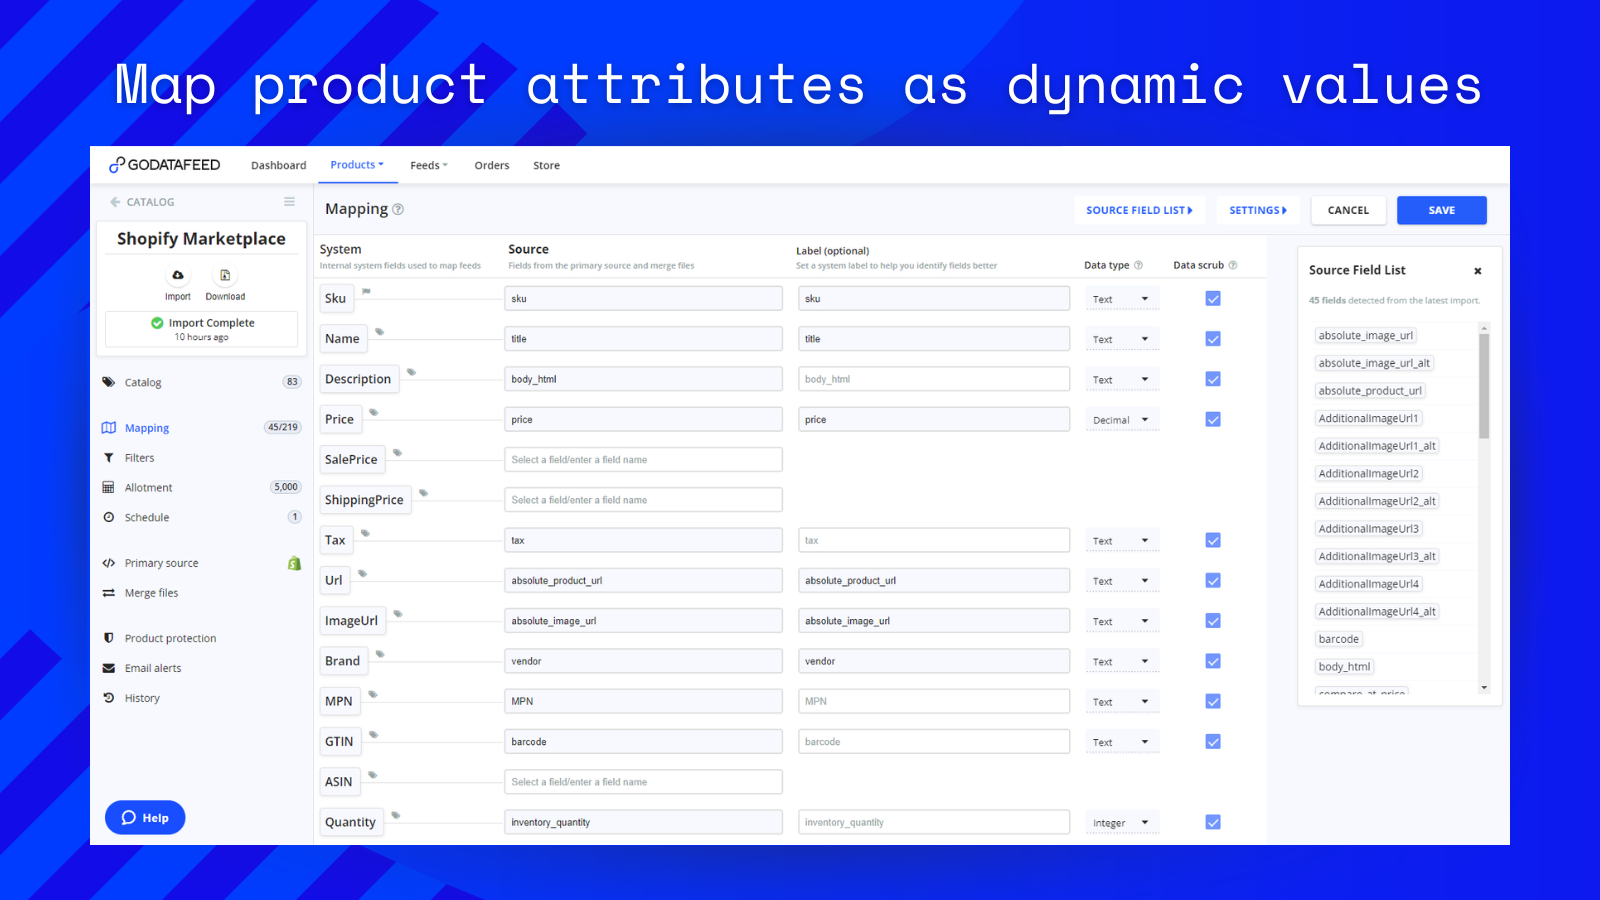 Map product attributes as dynamic values